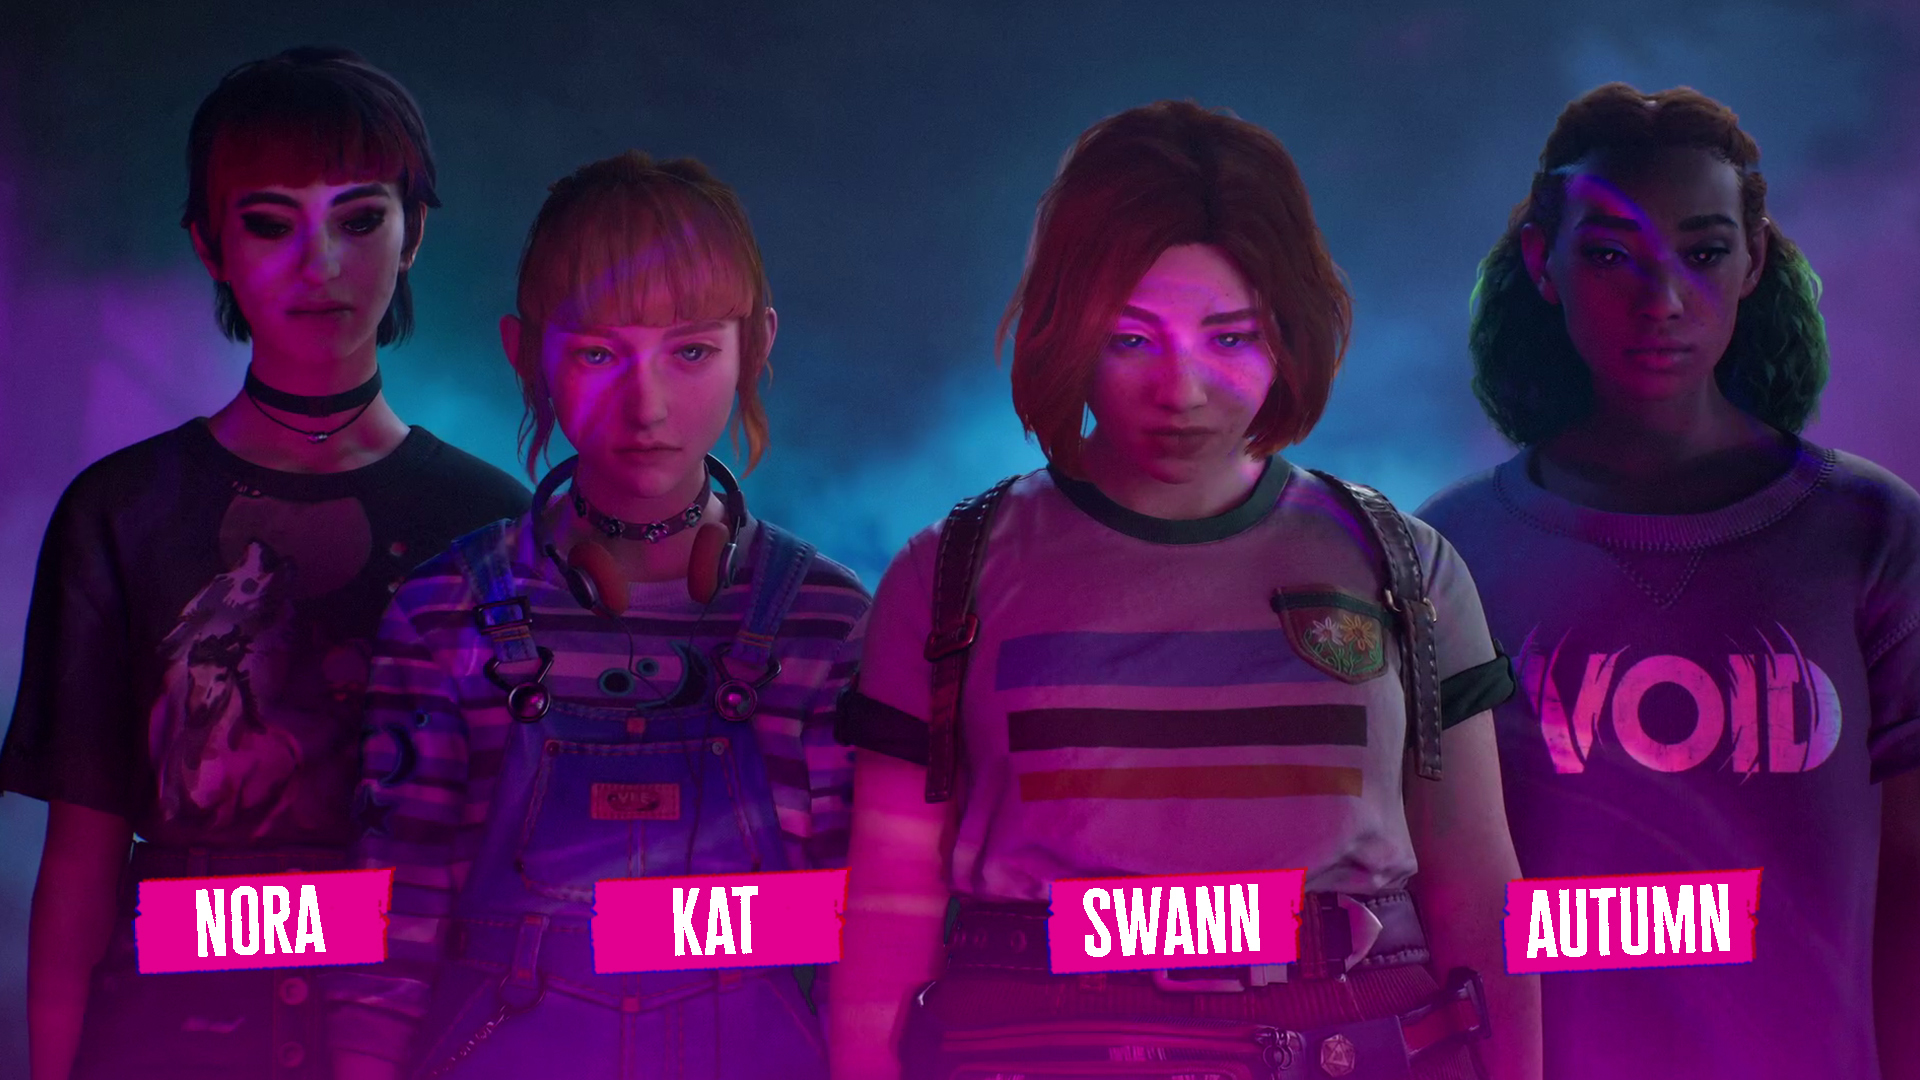 A screenshot from Lost Records: Bloom & Rage. It shows four characters: Nora, Kat, Swann, and Autumn.